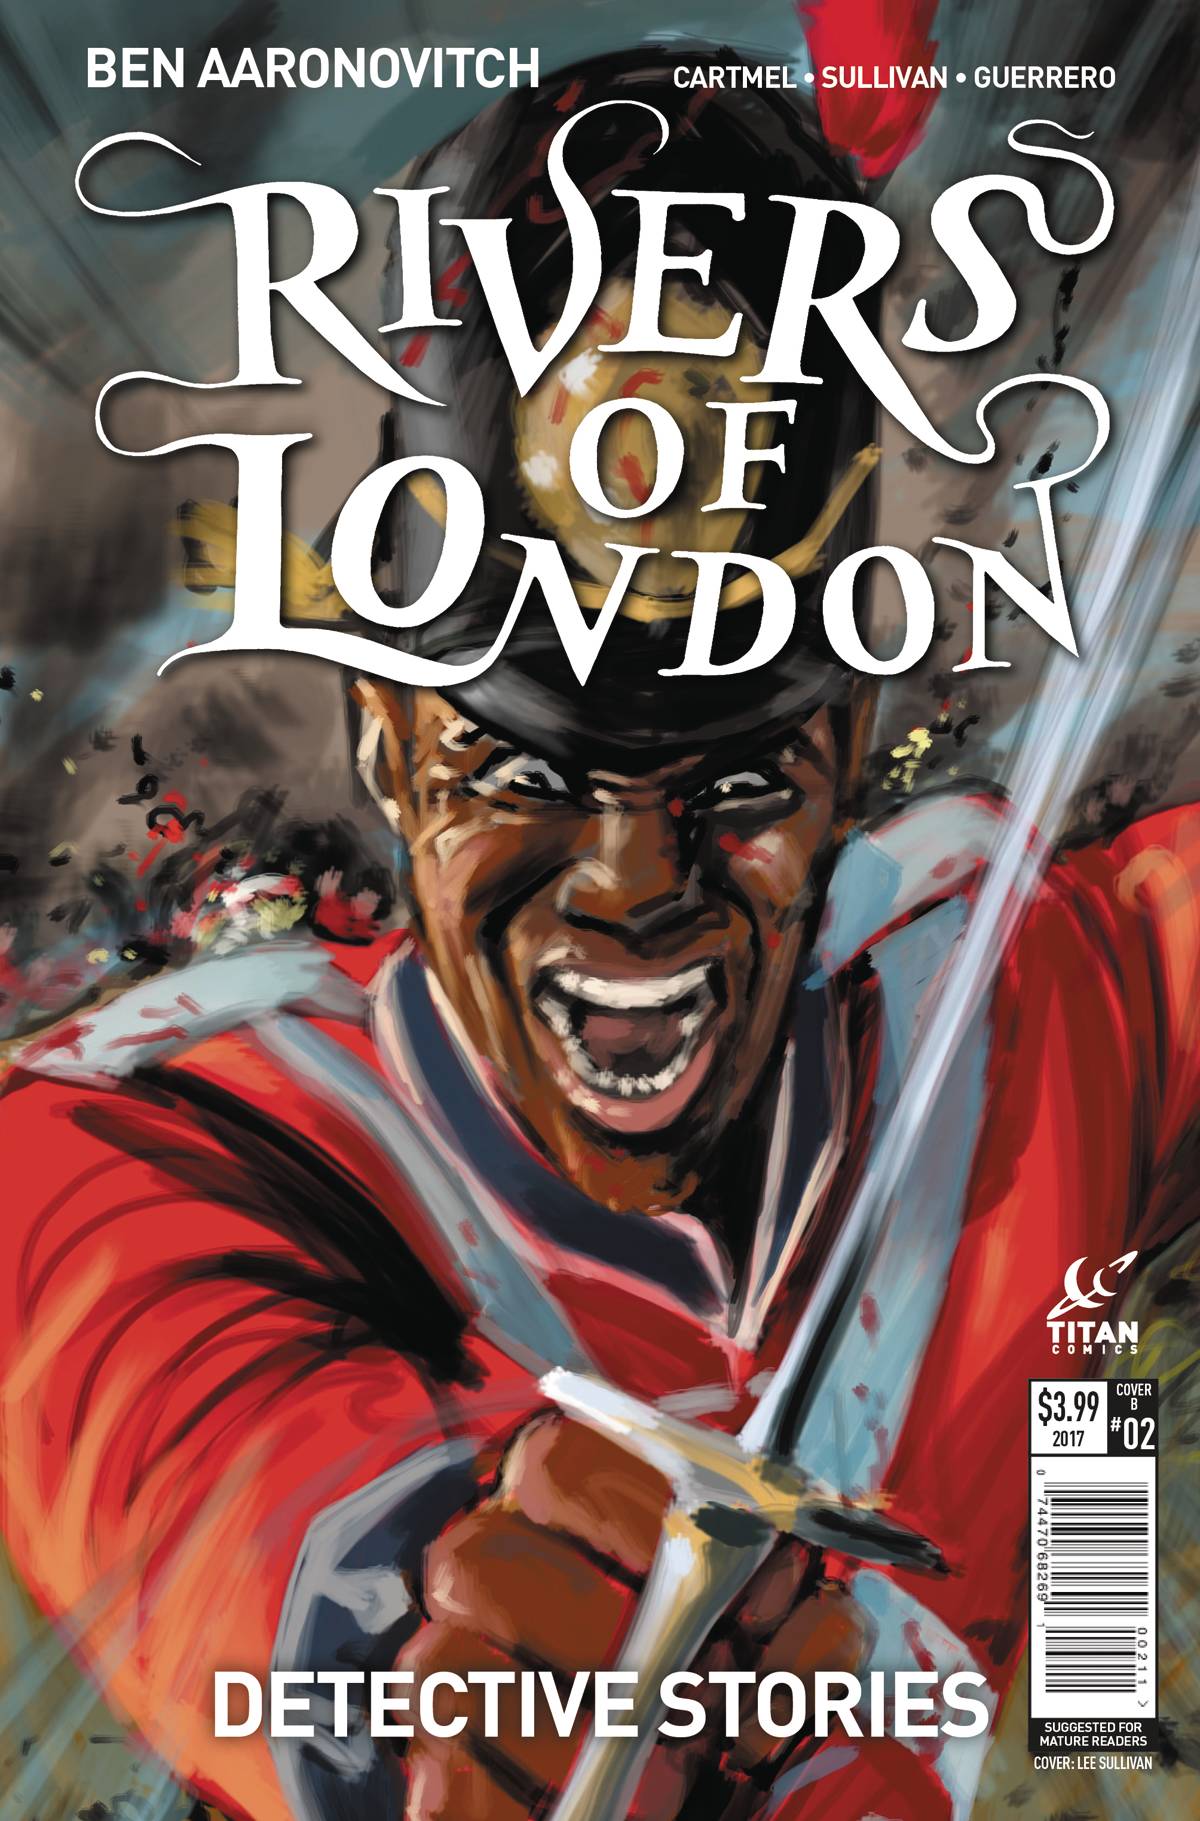 RIVERS OF LONDON: DETECTIVE STORIES#2